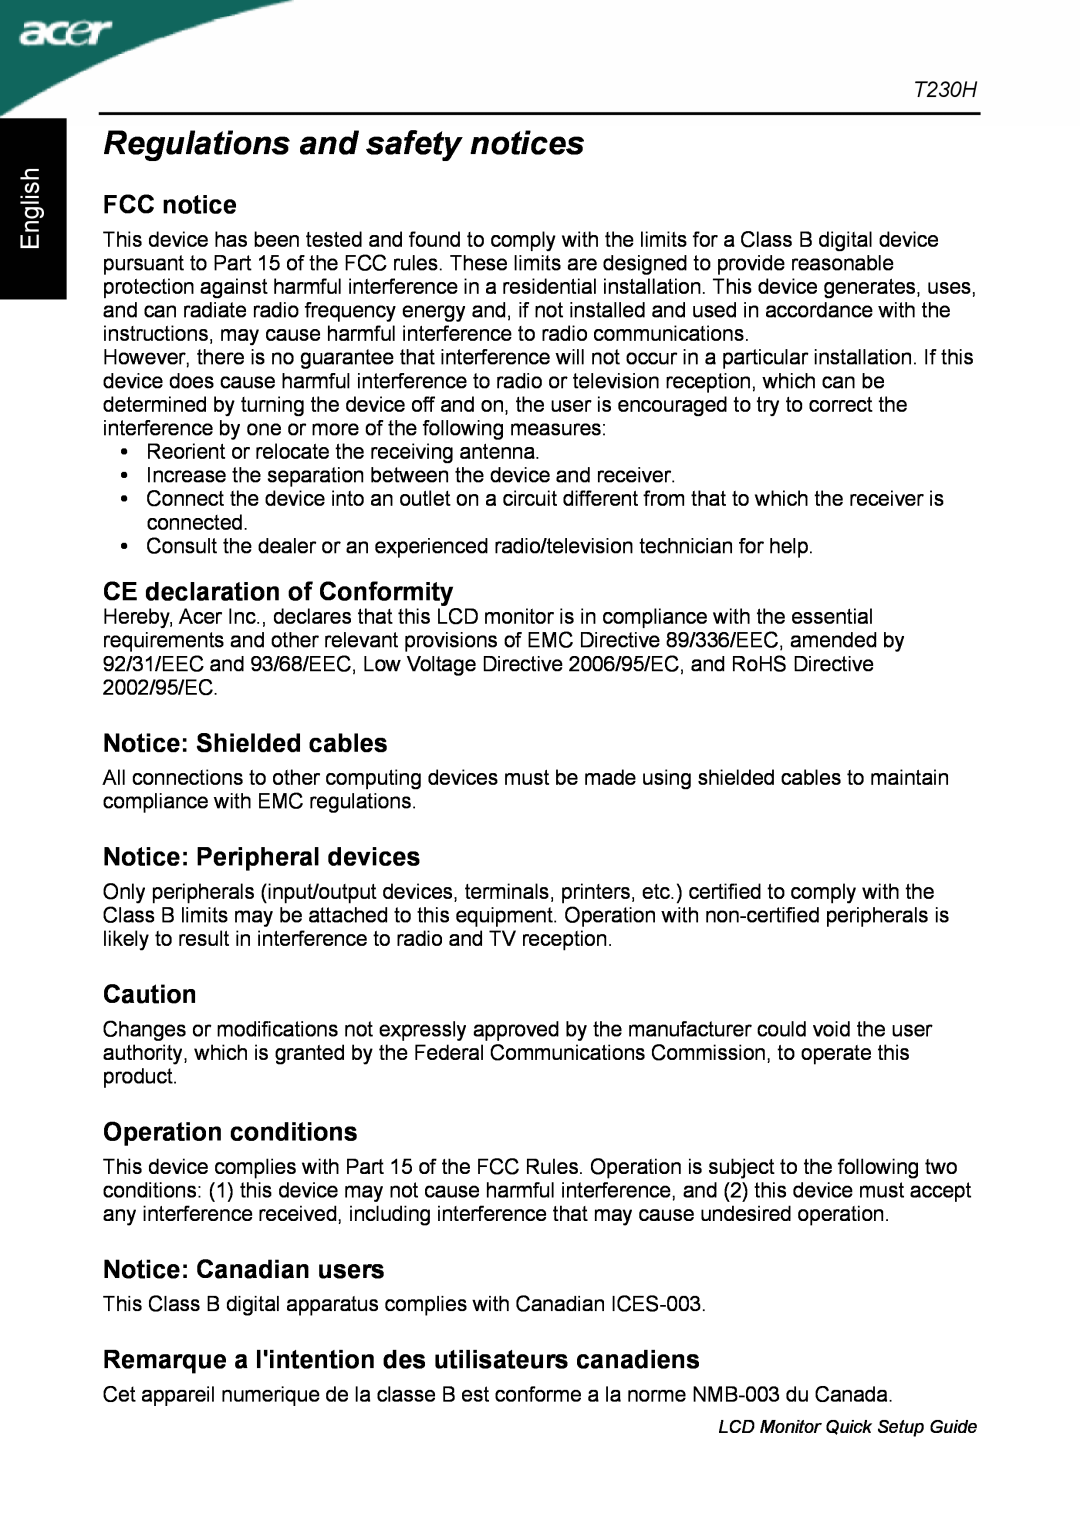 Acer T230H Regulations and safety notices, English, FCC notice, CE declaration of Conformity, Notice Shielded cables 